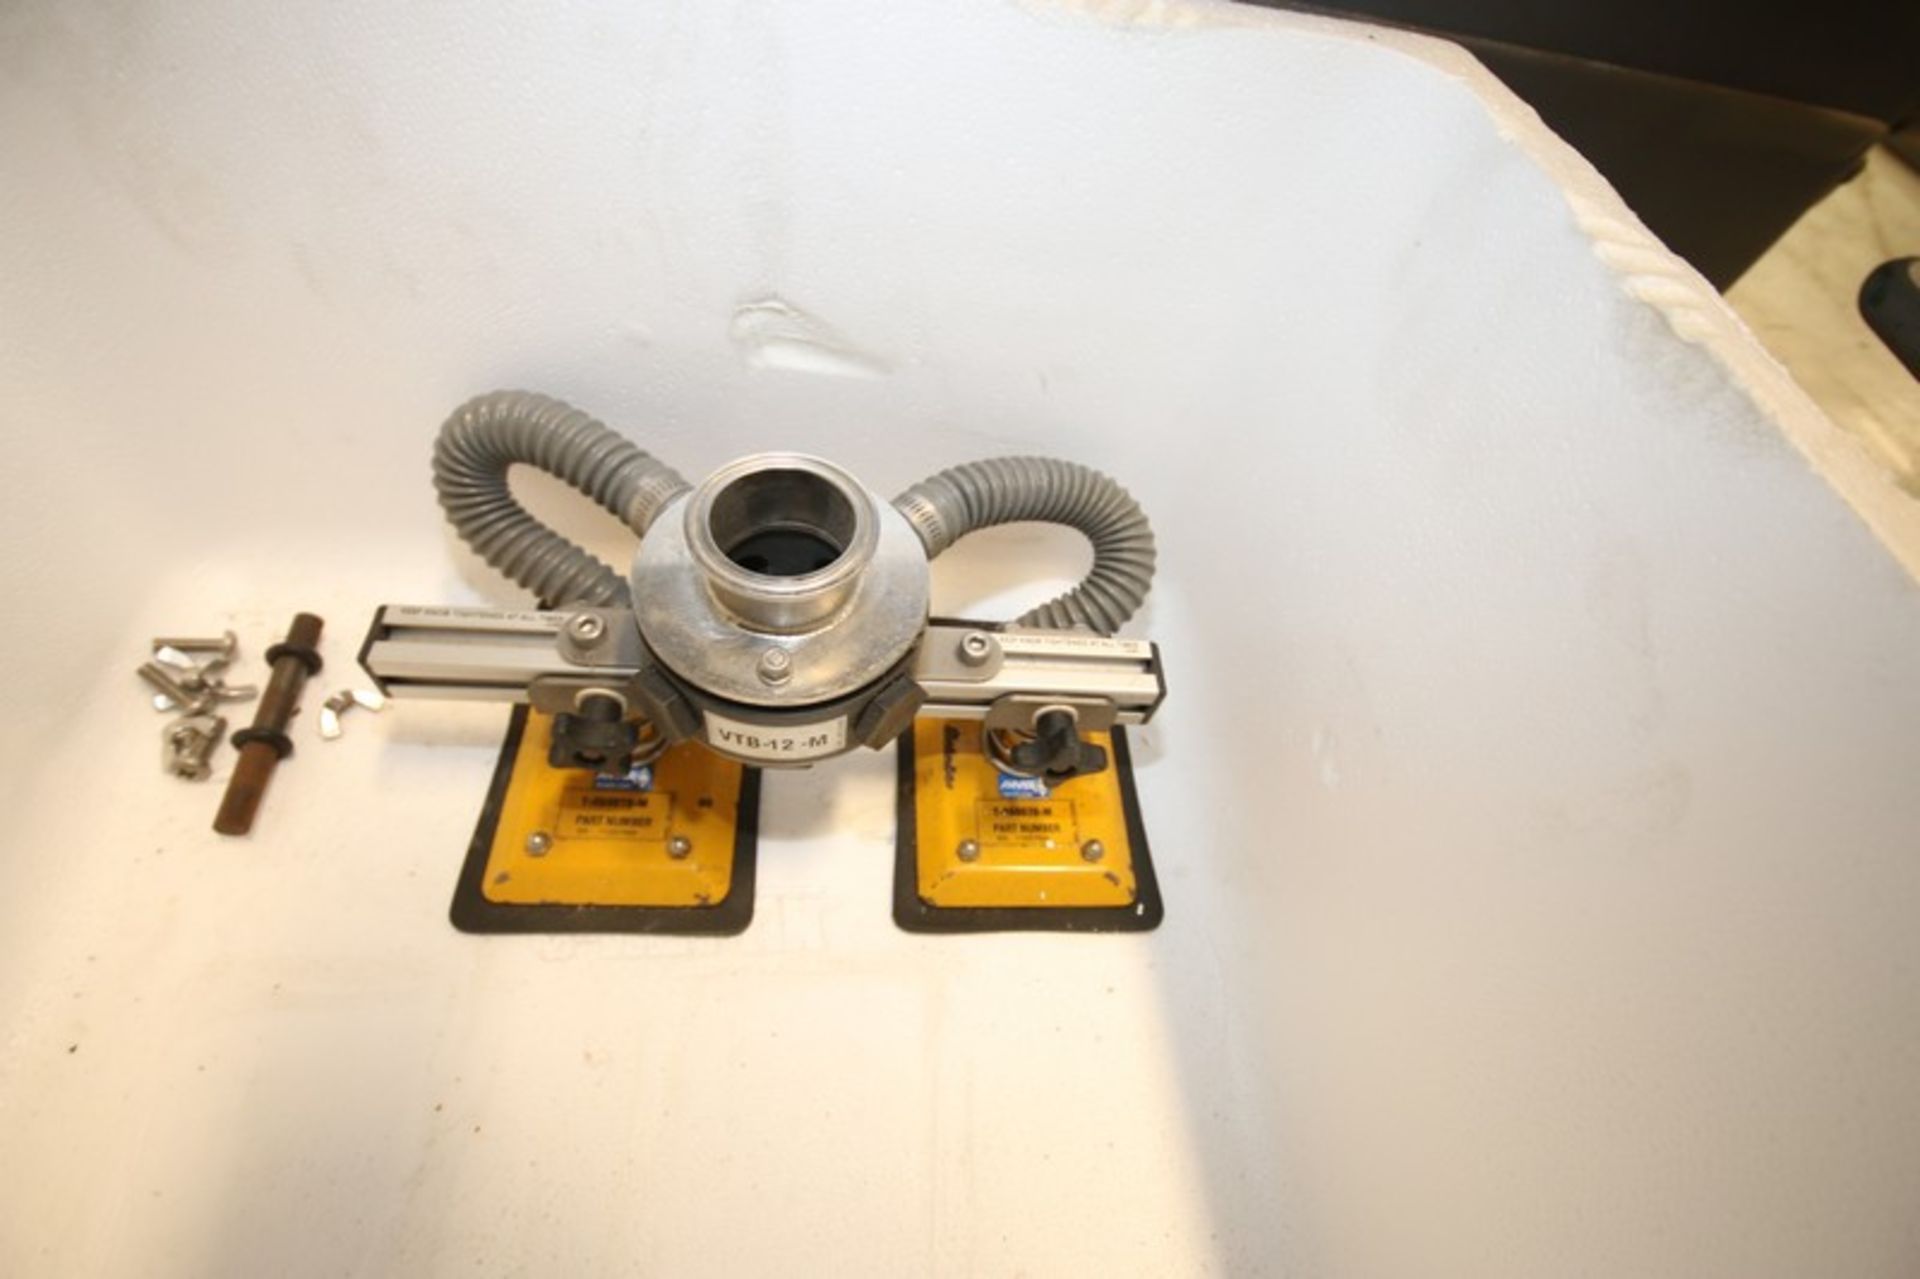 Anver Vacuum Lifting System with VT100-2.5-D7 Lifter & VB-7 Vacuum Generator, Includes Model VTB- - Image 4 of 4